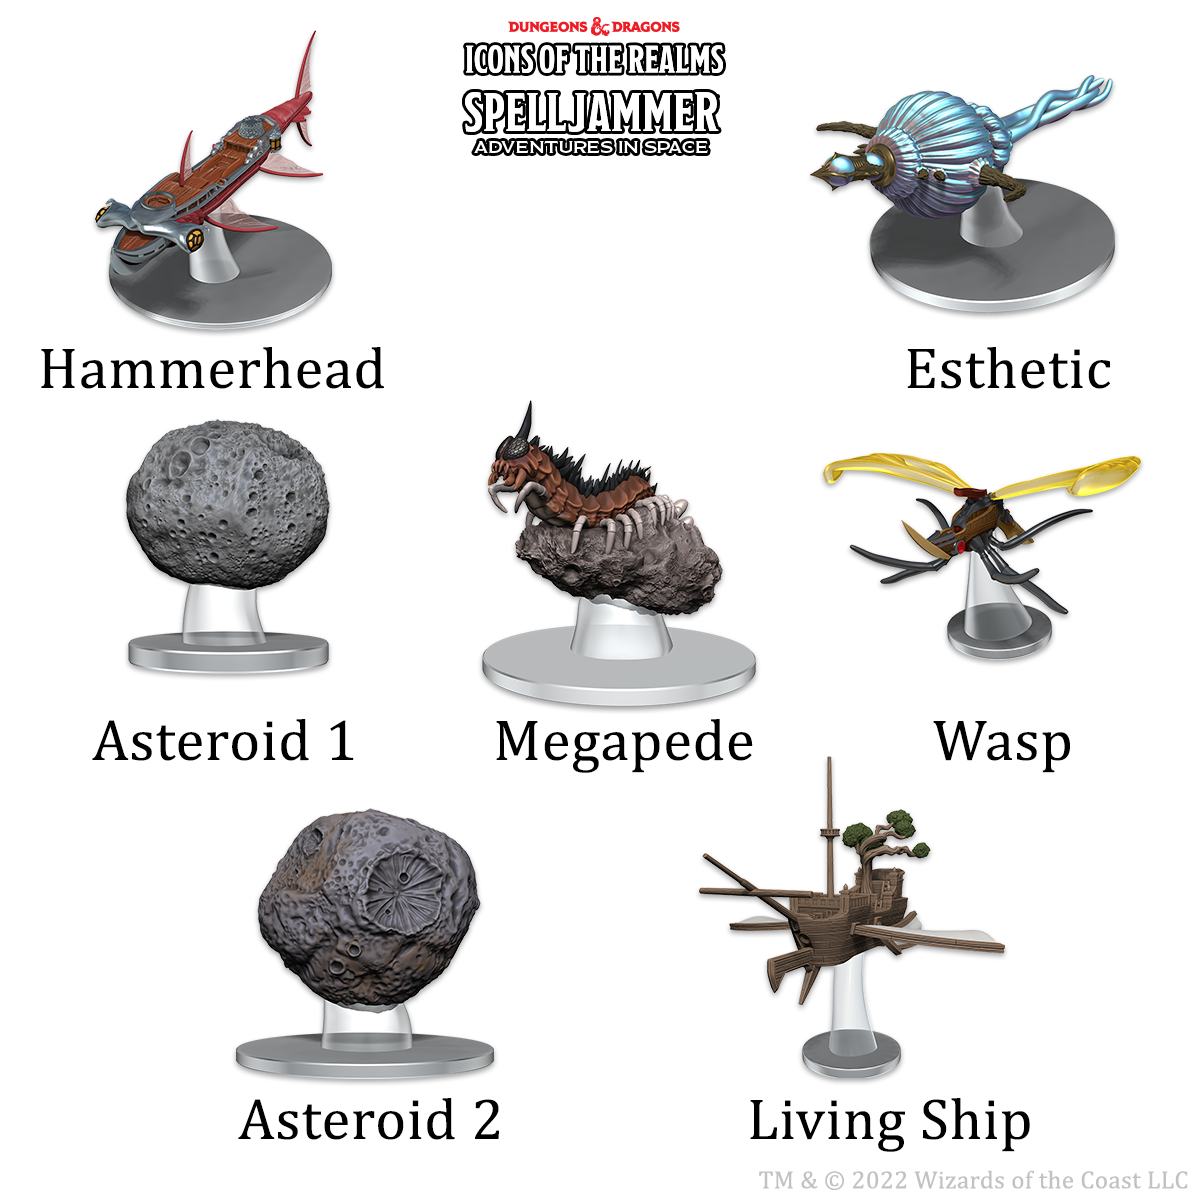 D&D Icons of the Realms: Spelljammer Adventures in Space: Asteroid Encounters Ship Scale (DAMAGED) 